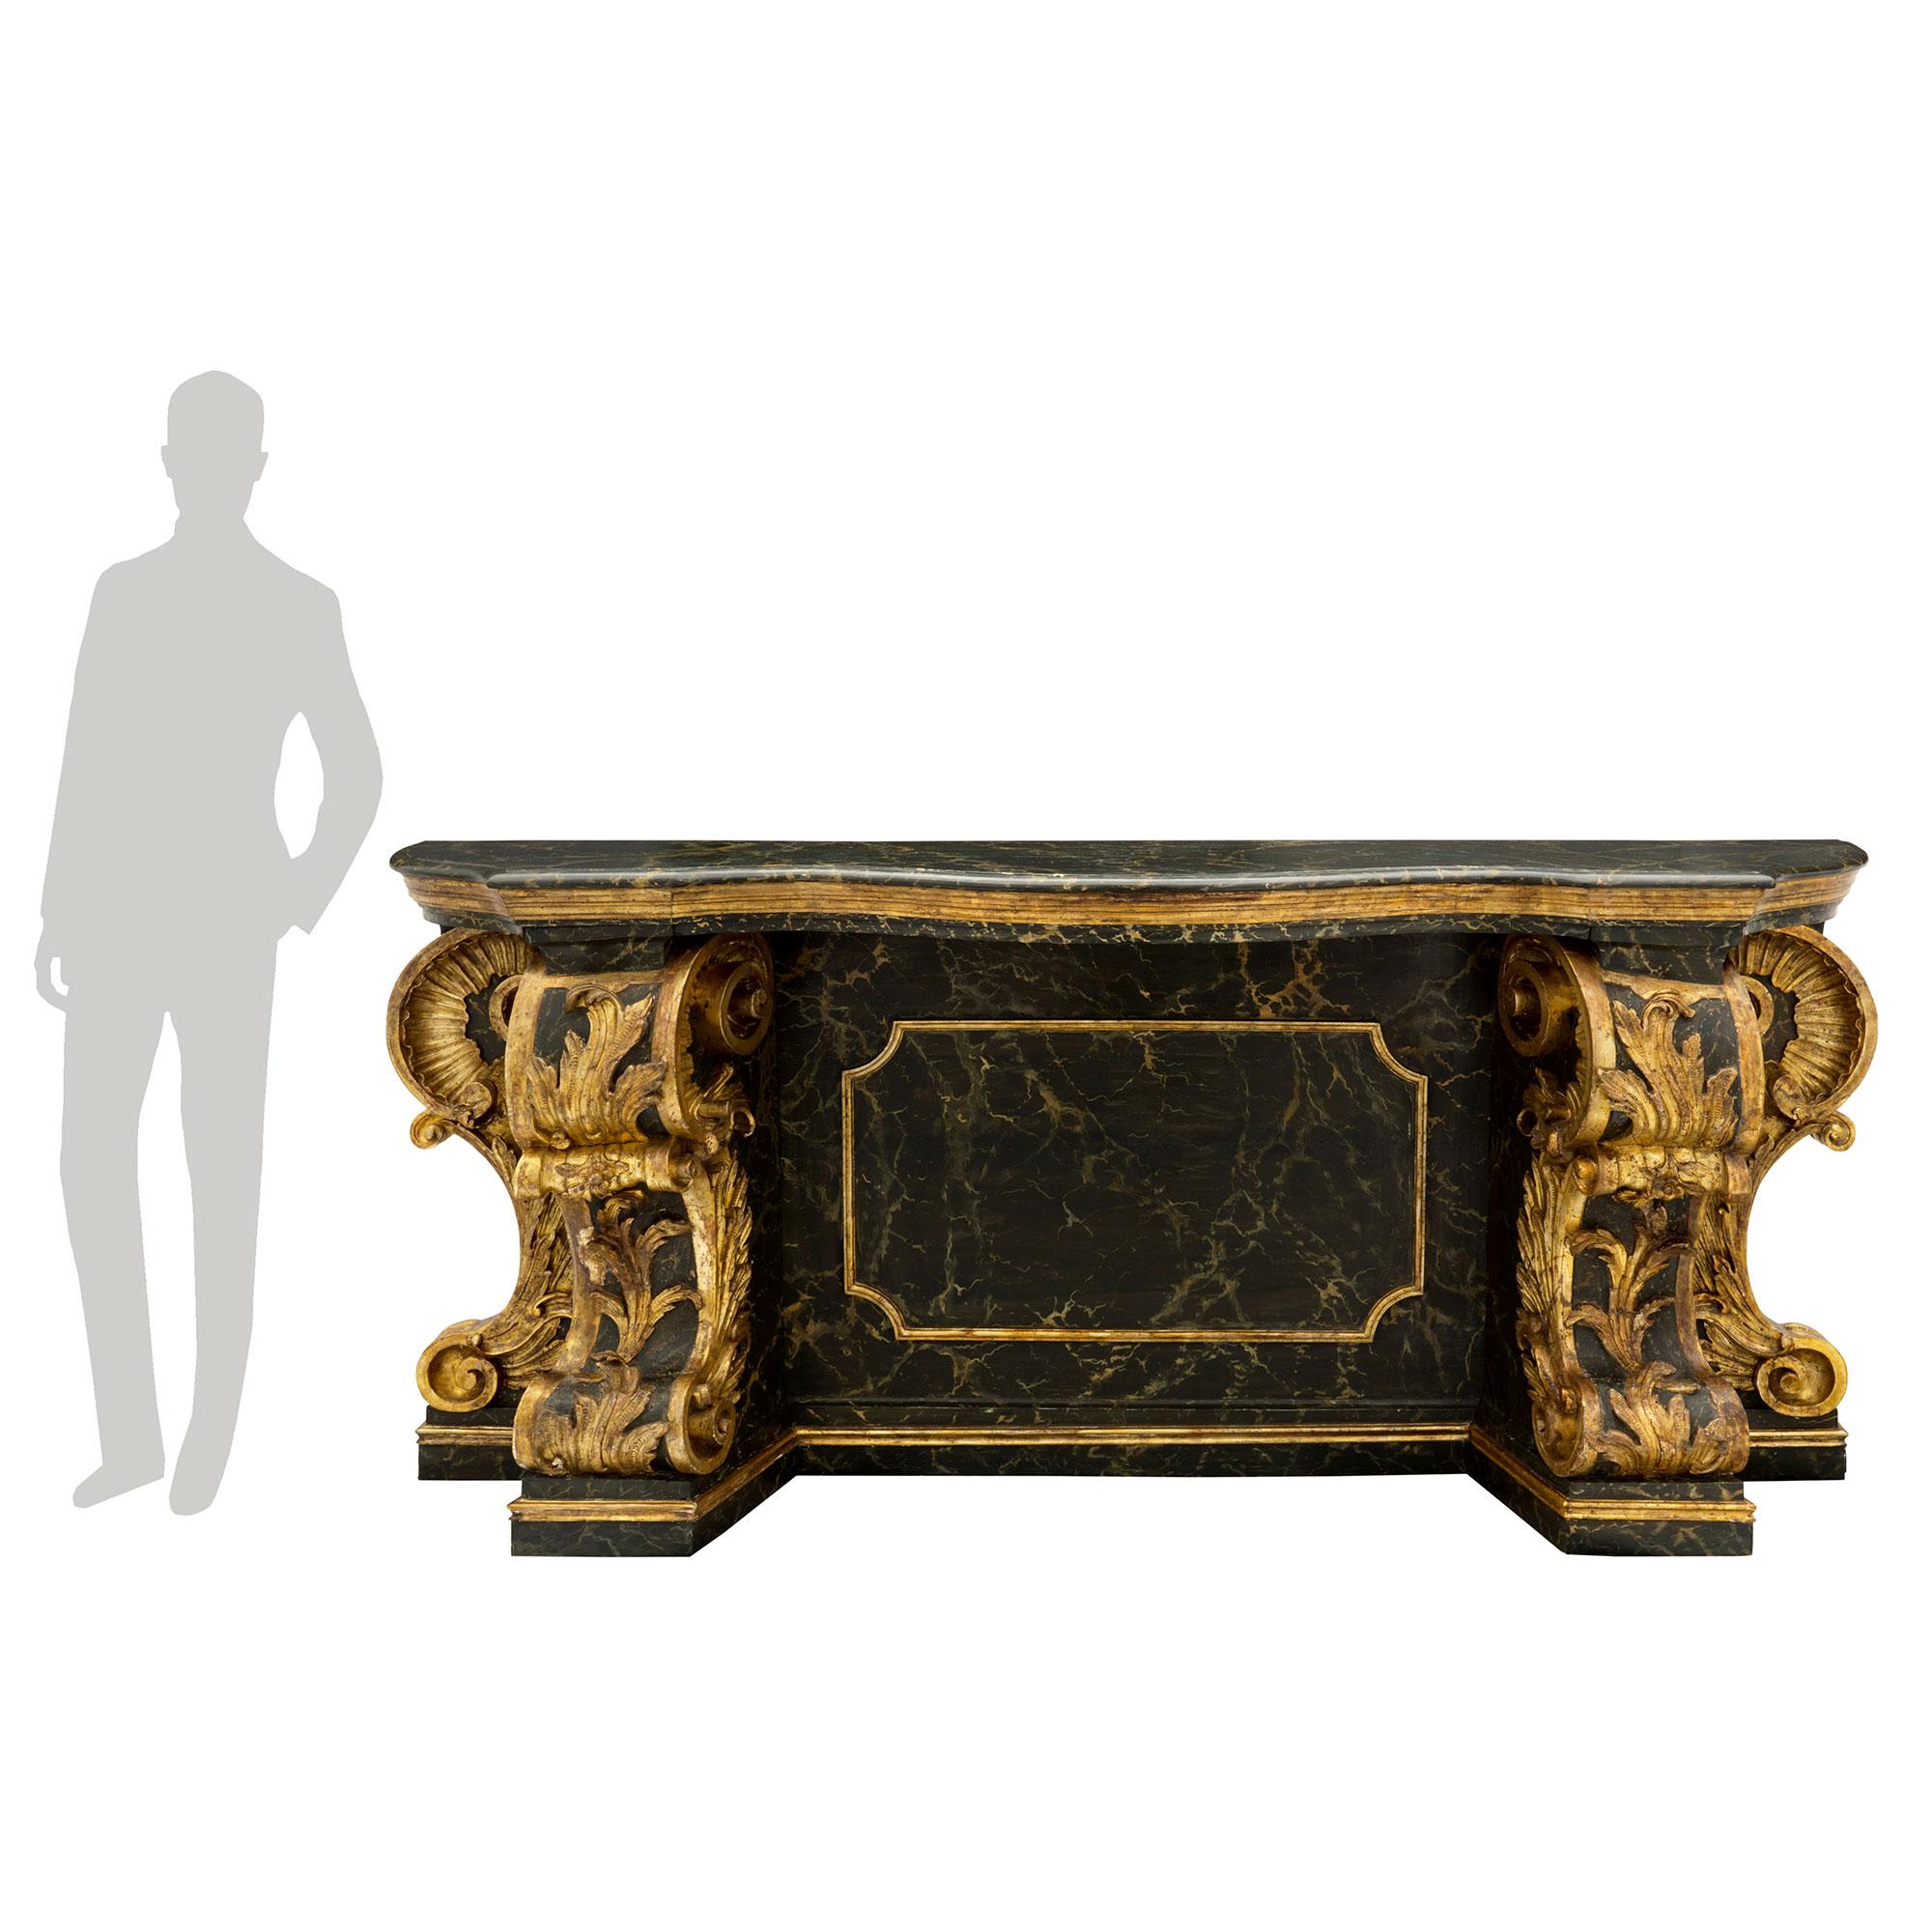 An impressive and monumentally scaled Italian late 18th/early 19th century faux painted Vert Doral marble and mecca console, from Sicily. The freestanding console is raised by a fine mottled band below stunning scrolled supports adorned with